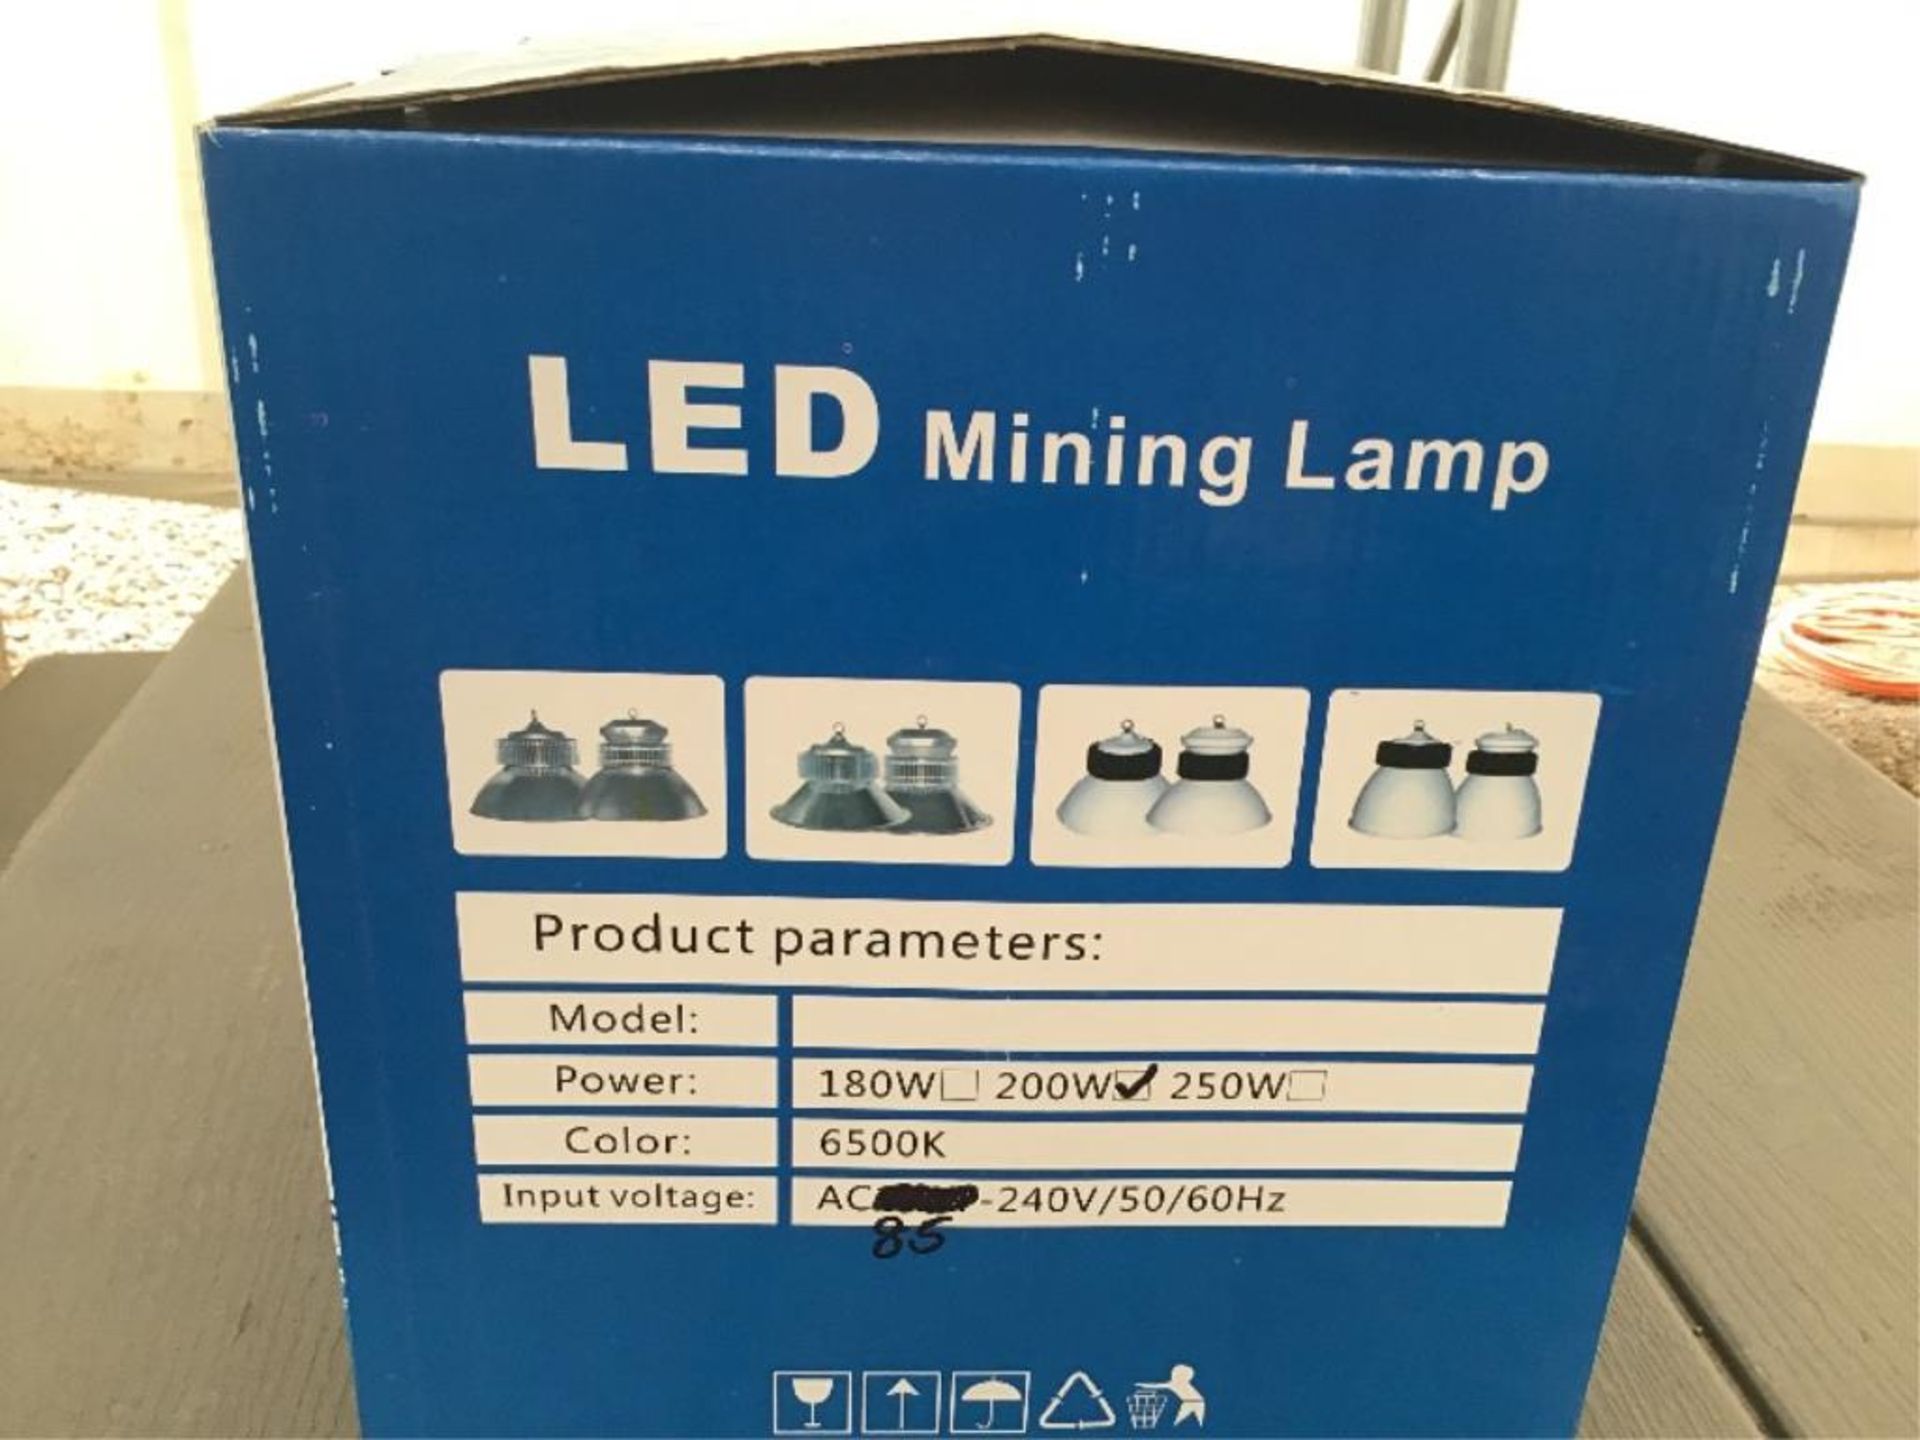 LED Mining Lamp 200Watt 85V-240V Perfect for Hanging in Shops, Cold Storage, Arenas, etc. - Image 2 of 2